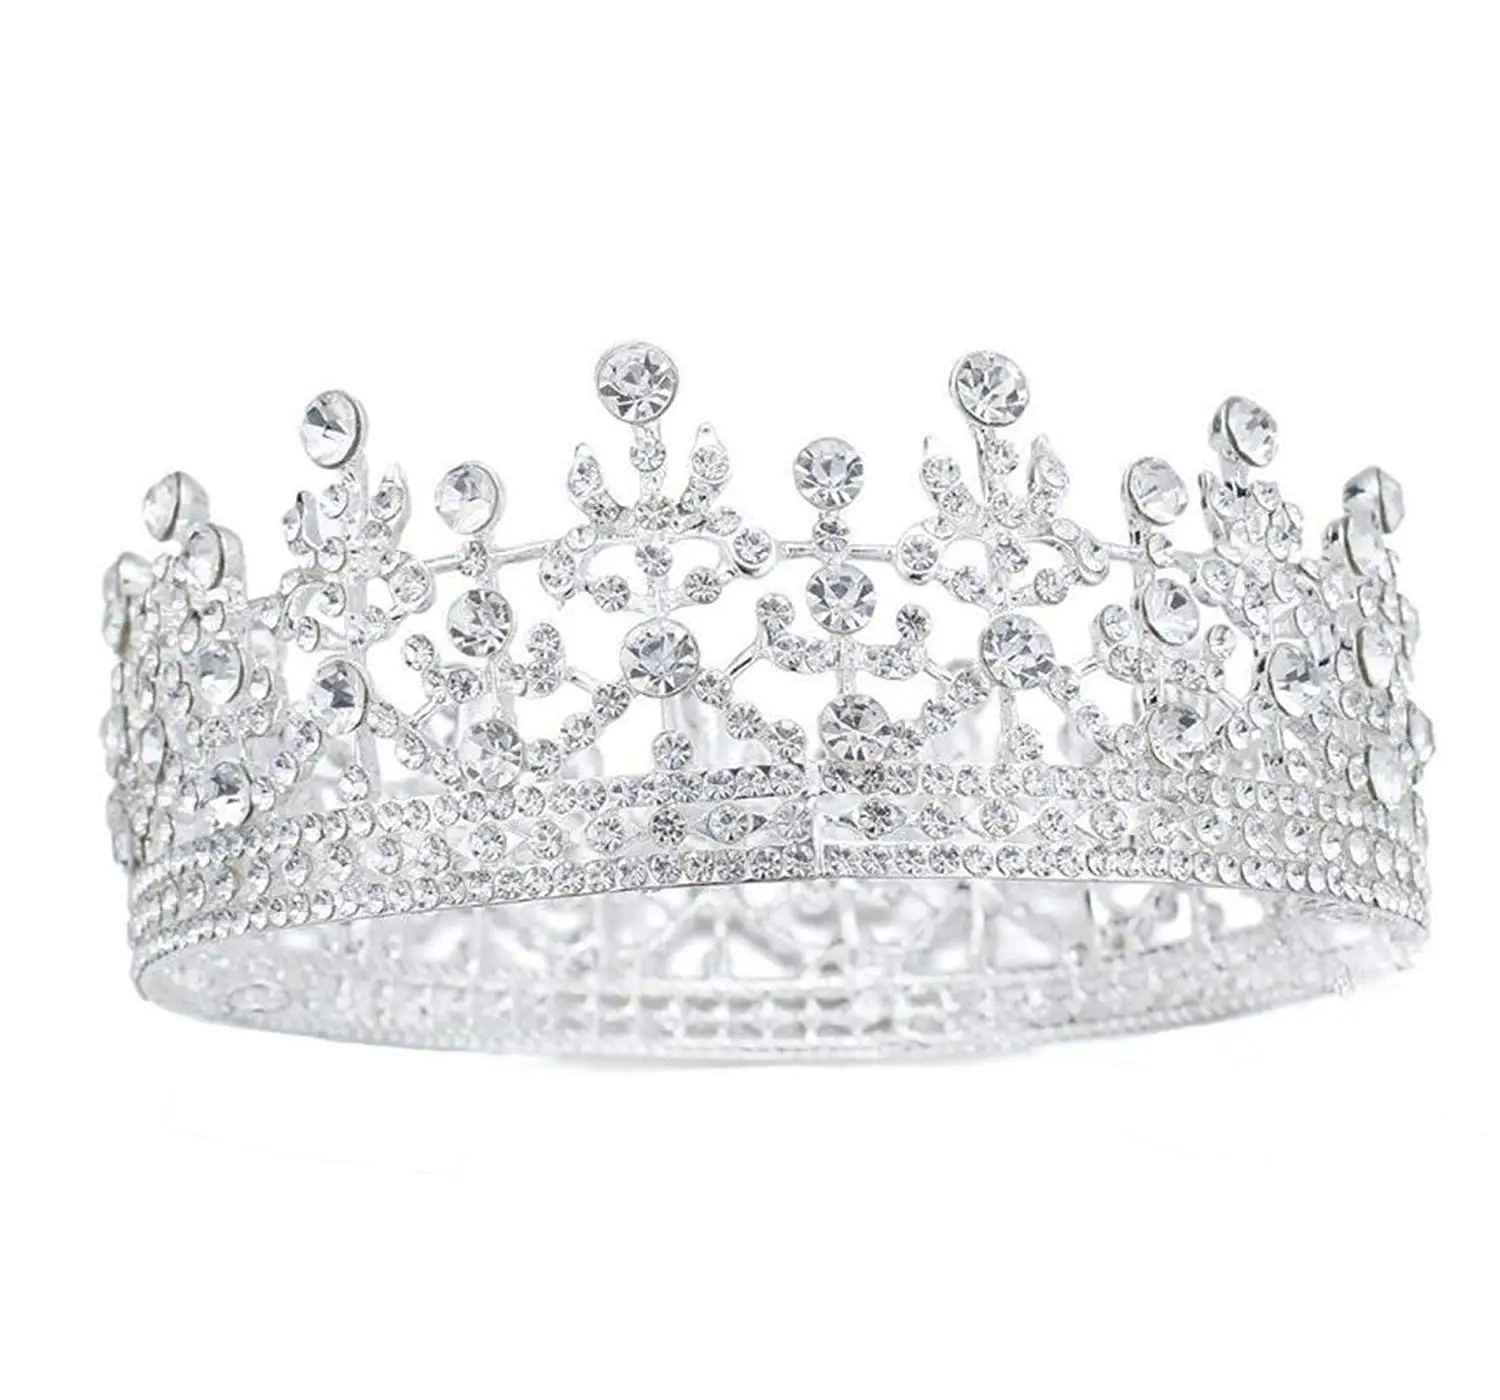 Cheap Prom King And Queen Crowns Find Prom King And Queen Crowns